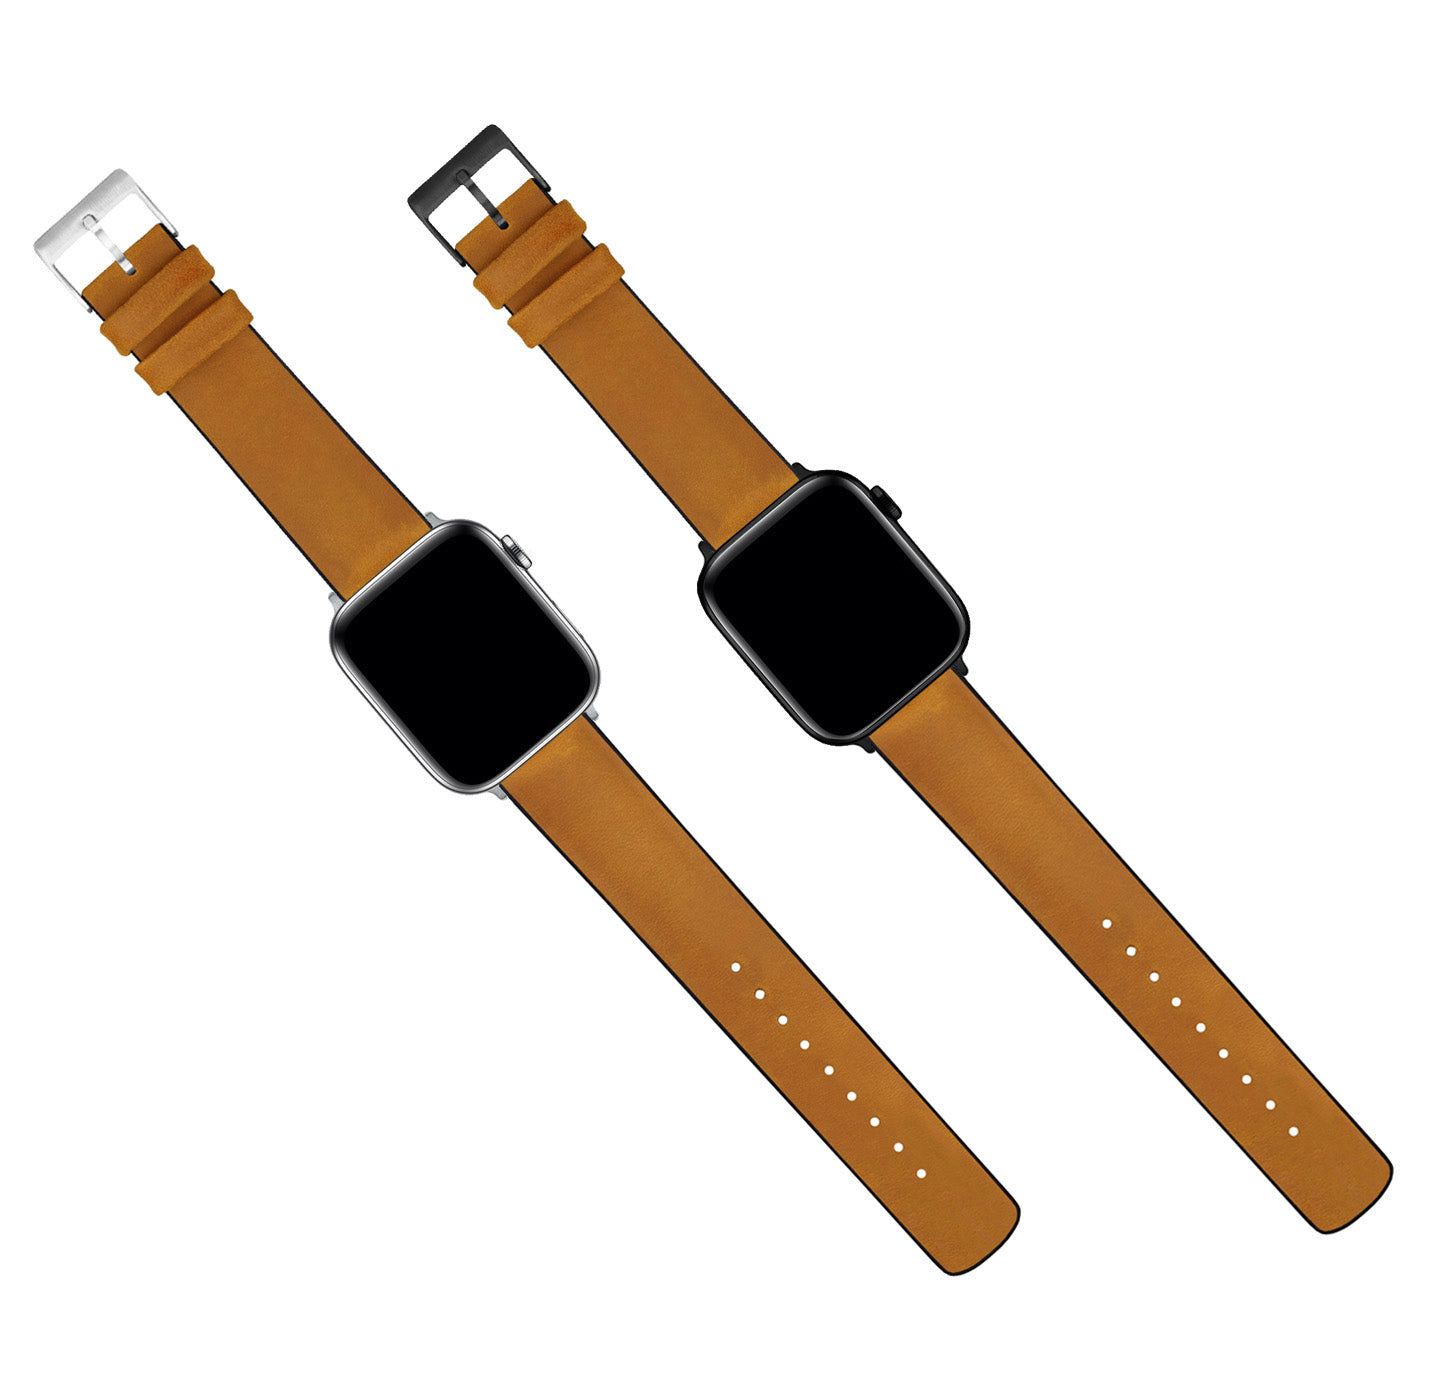 Apple Watch | Cedar Brown Leather and Rubber Hybrid - Barton Watch Bands